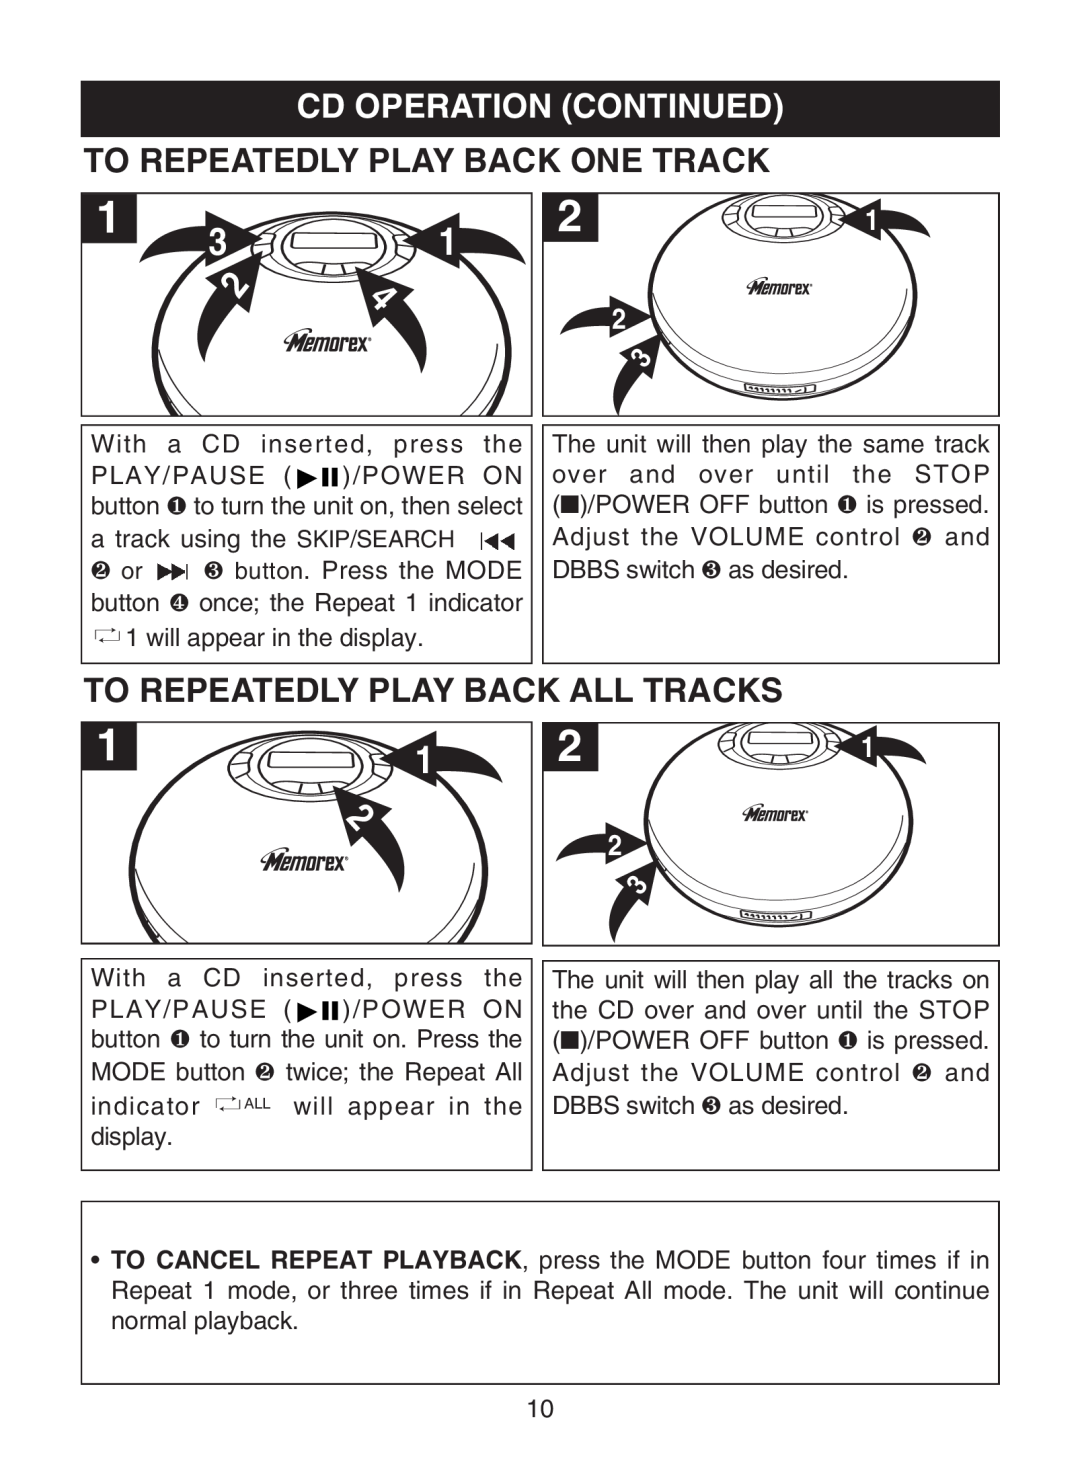 Memorex MD6483 manual To Repeatedly Play Back One Track, To Repeatedly Play Back All Tracks, Cd Operation Continued 